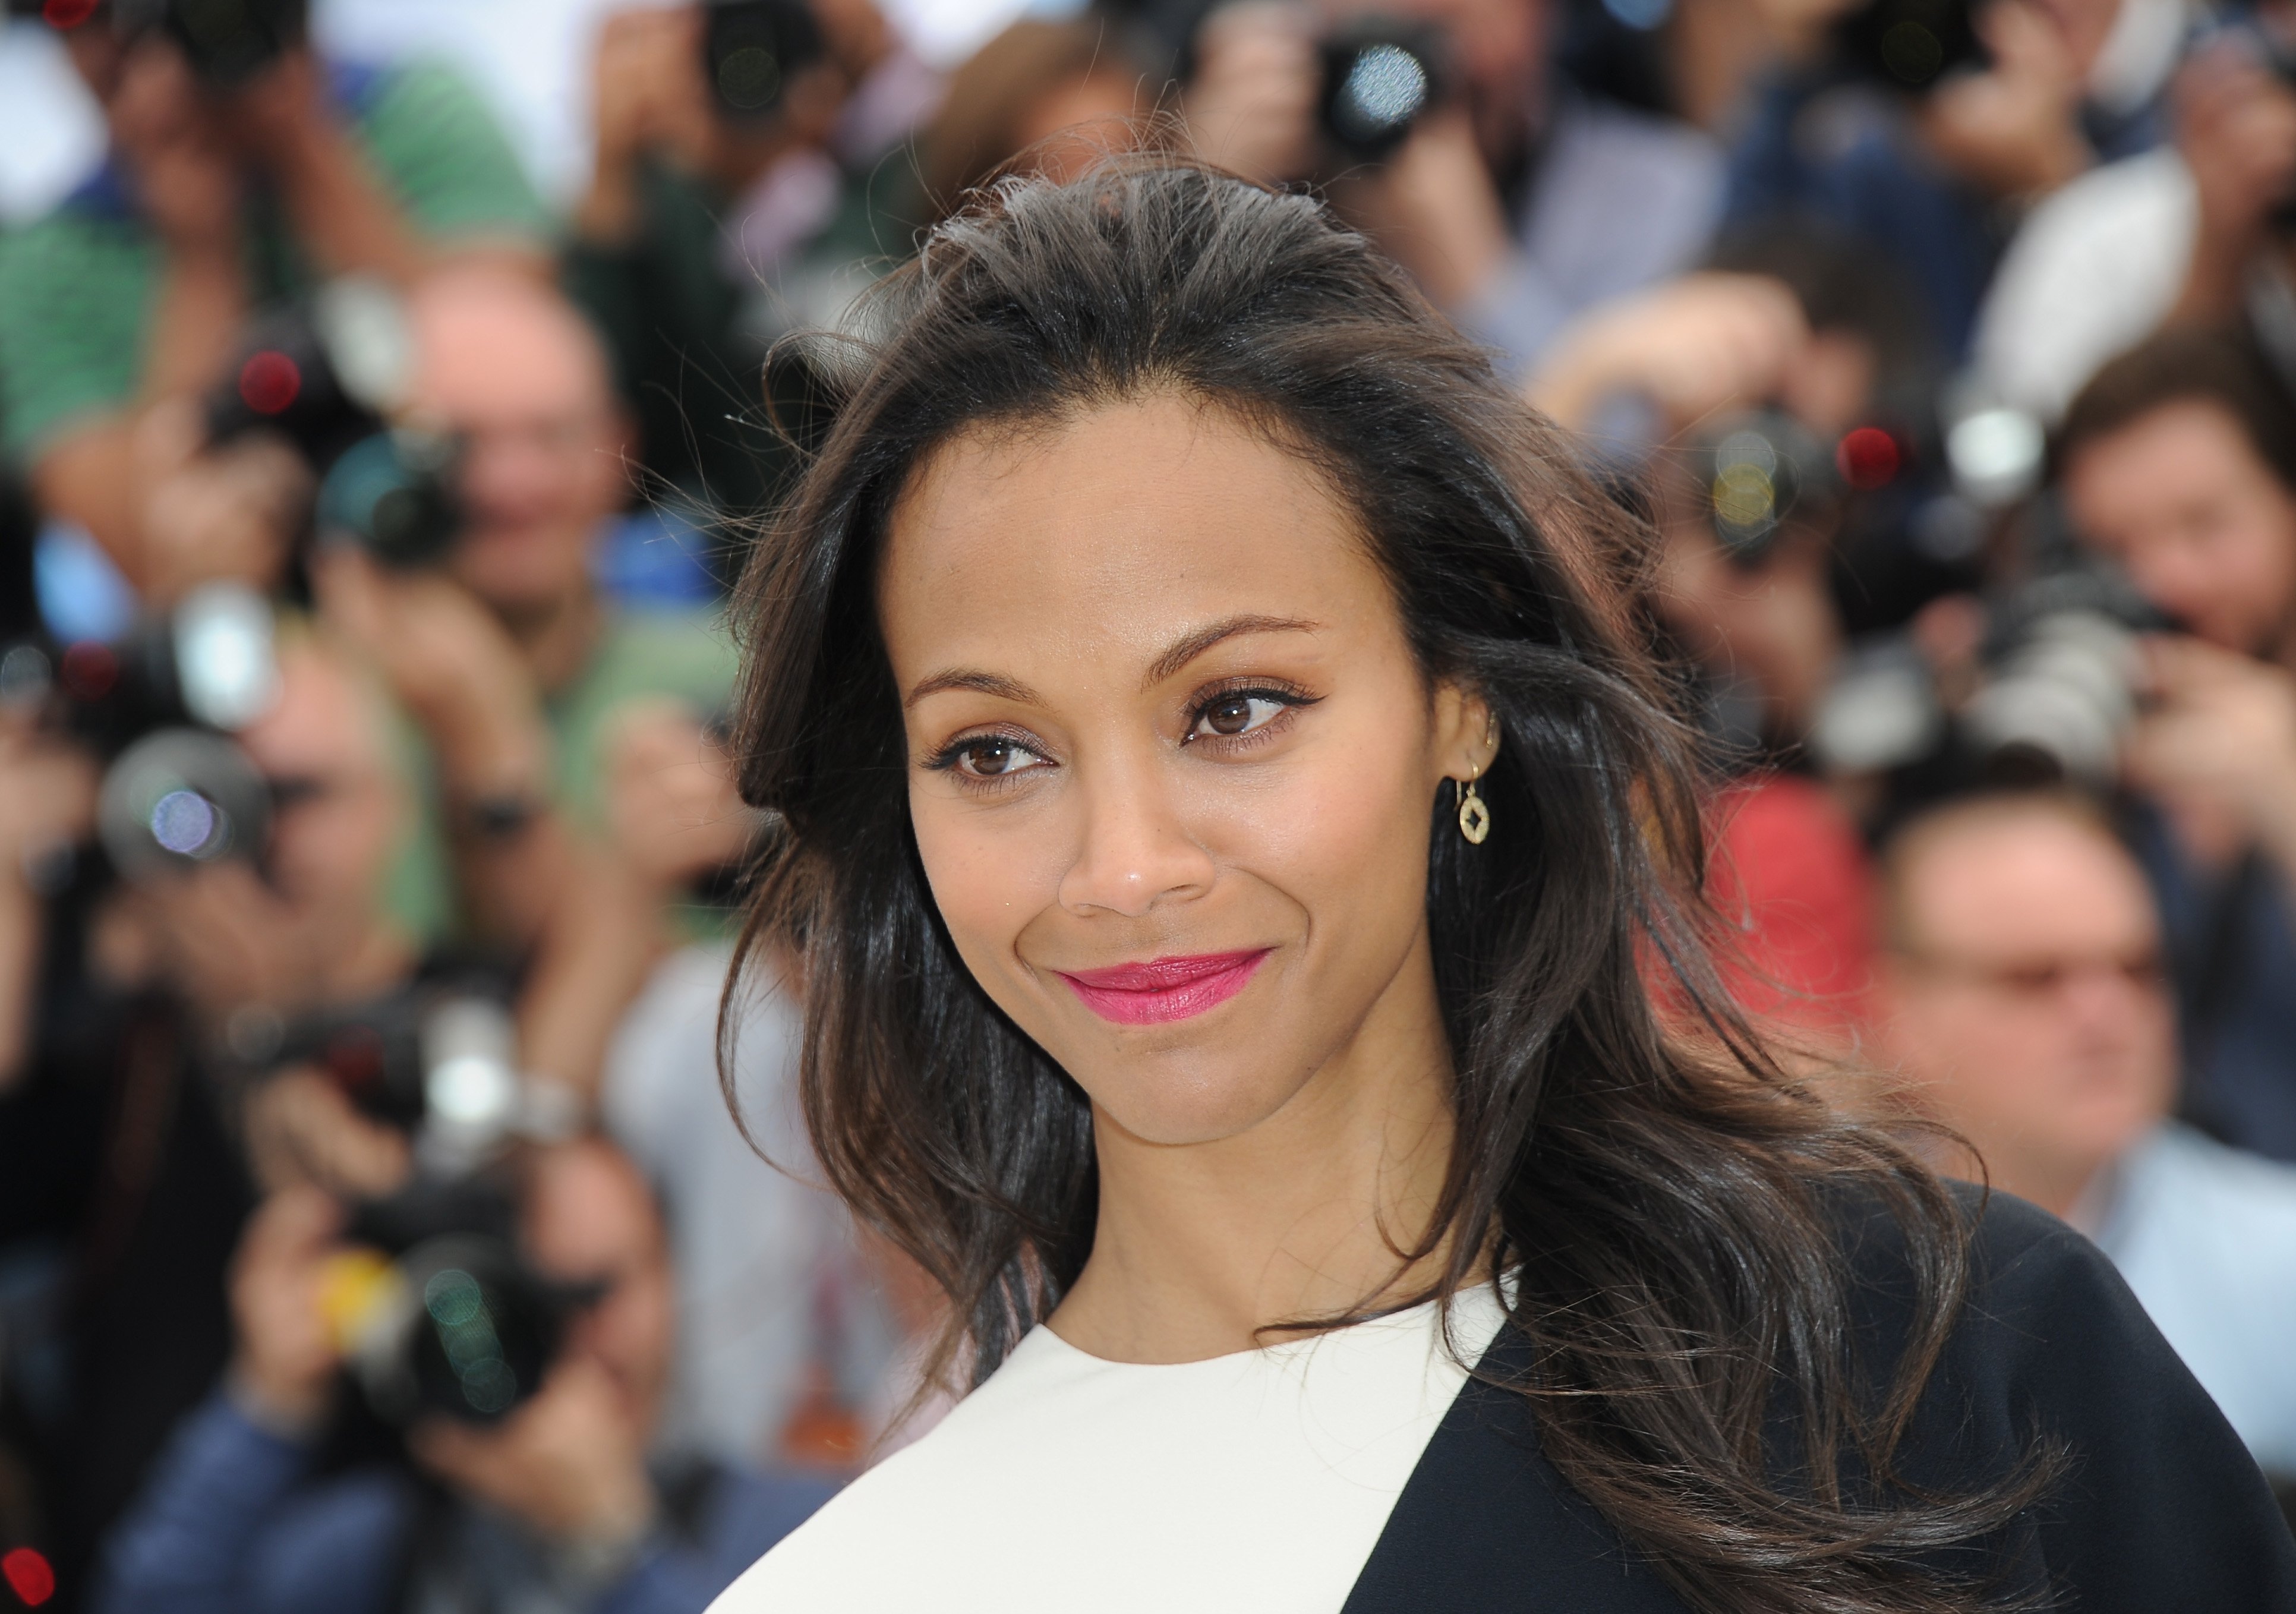 Zoe Saldana attends the photocall for 'Blood Ties' at The 66th Annual Cannes Film Festival on May 20, 2013. | Photo: GettyImages